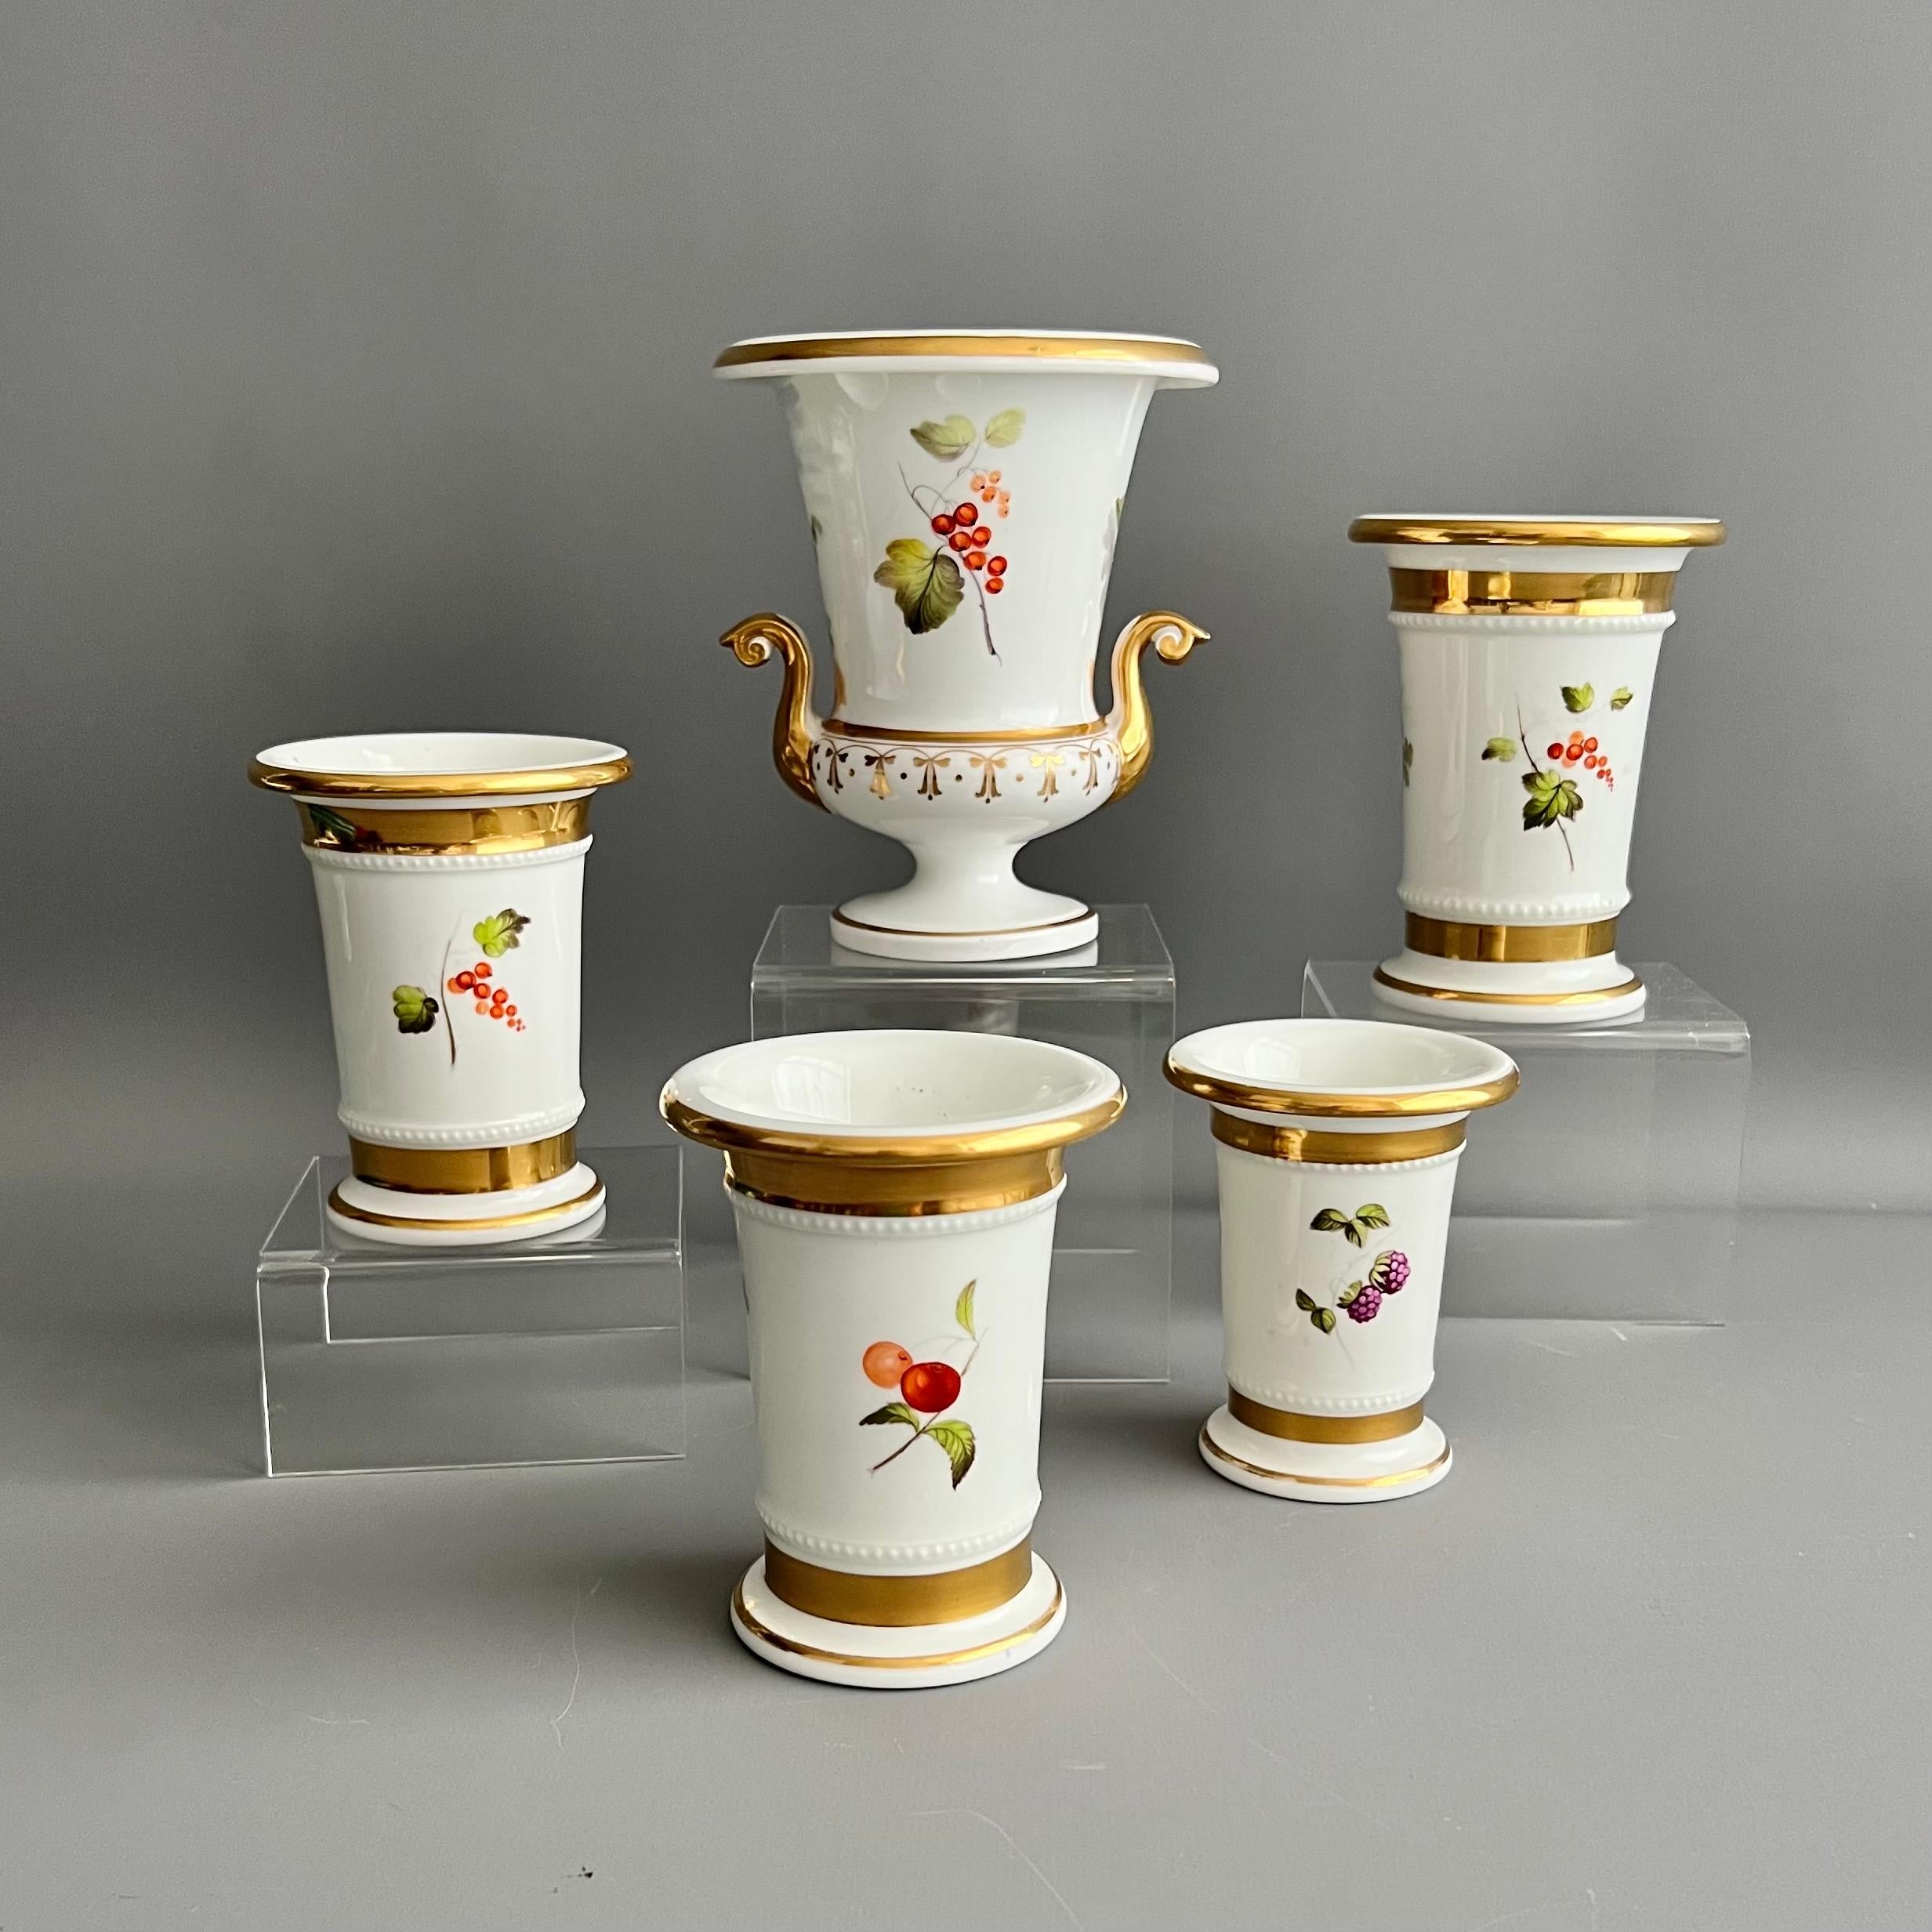 This is a beautiful garniture of five vases made by an unknown English maker in about 1820-1825. The garniture consists of one campana vase and four differently sized spill vases. The vases are white with beautiful hand painted fruit